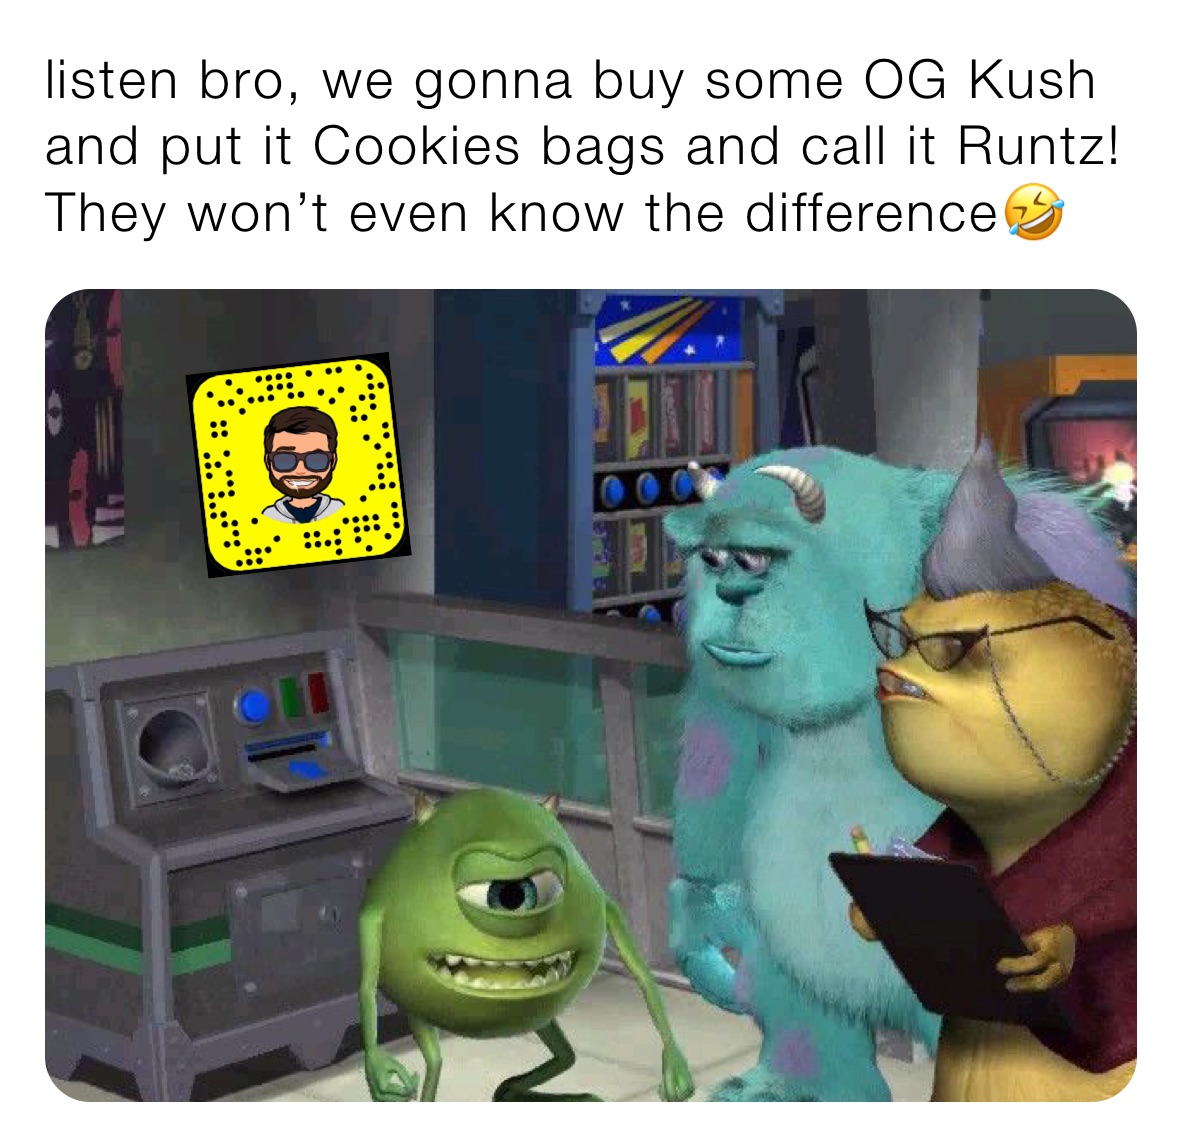 listen bro, we gonna buy some OG Kush and put it Cookies bags and call it Runtz!They won’t even know the difference🤣